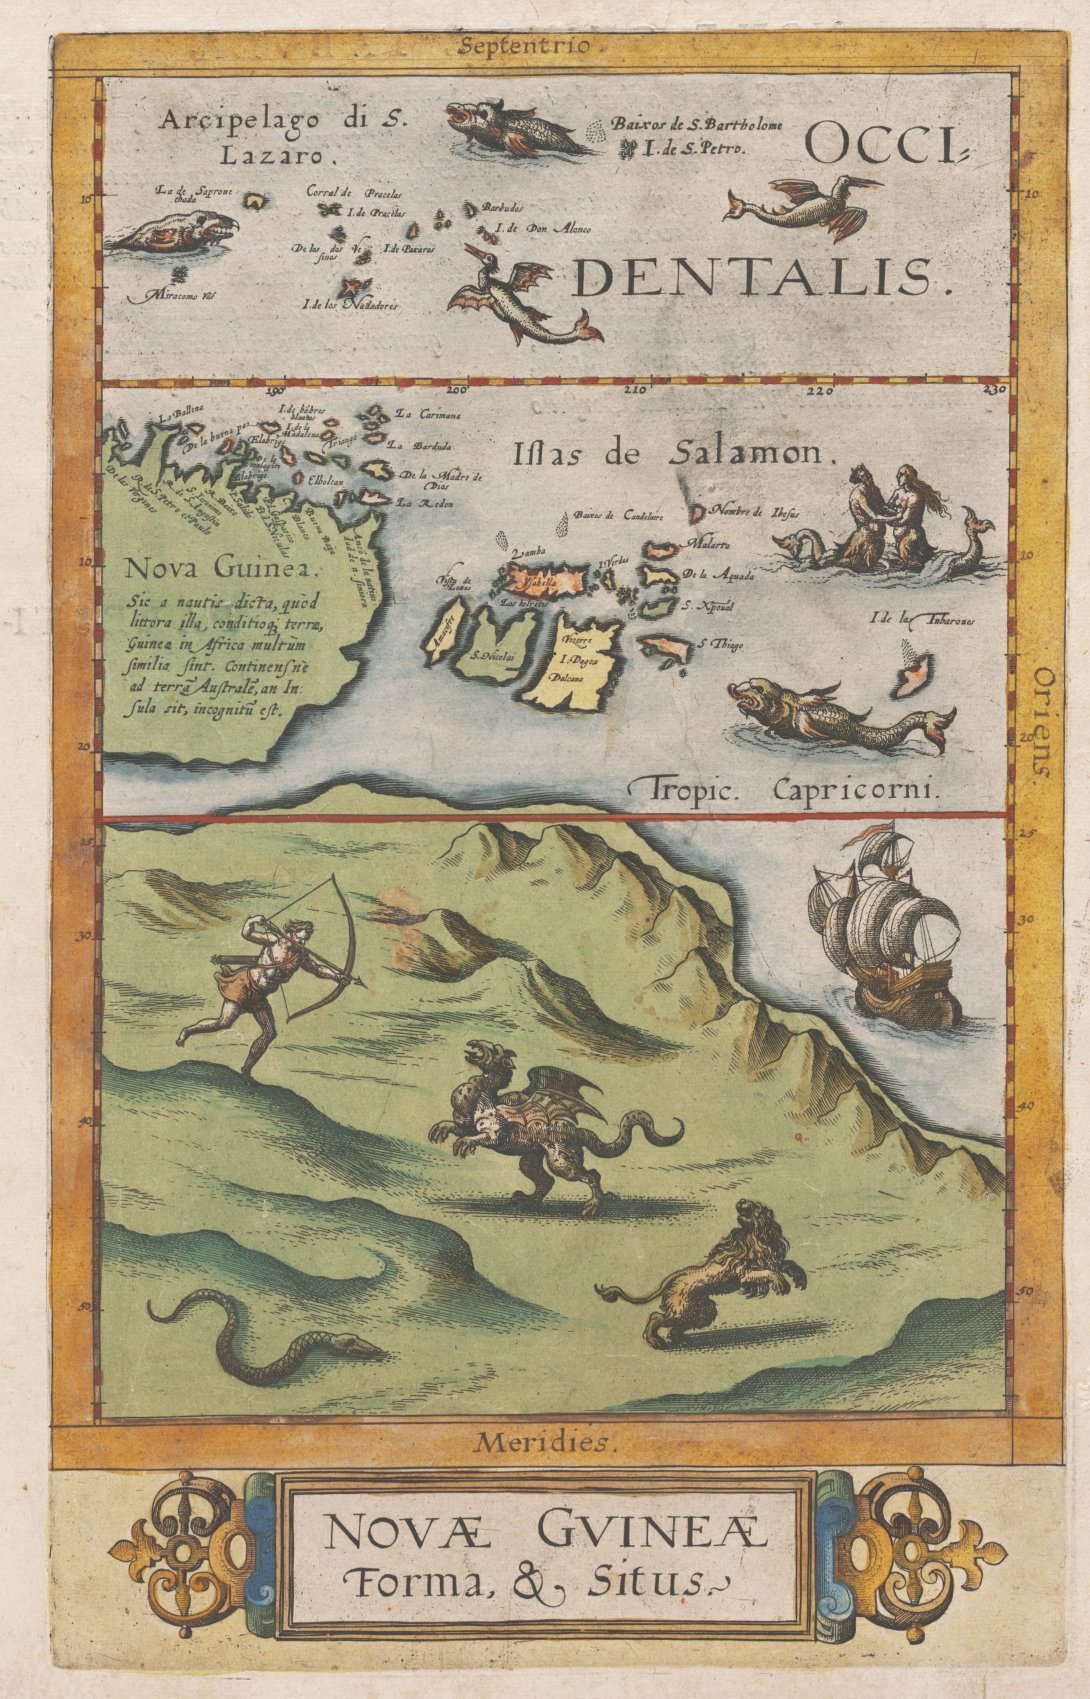 Portrait map with various monsters on page